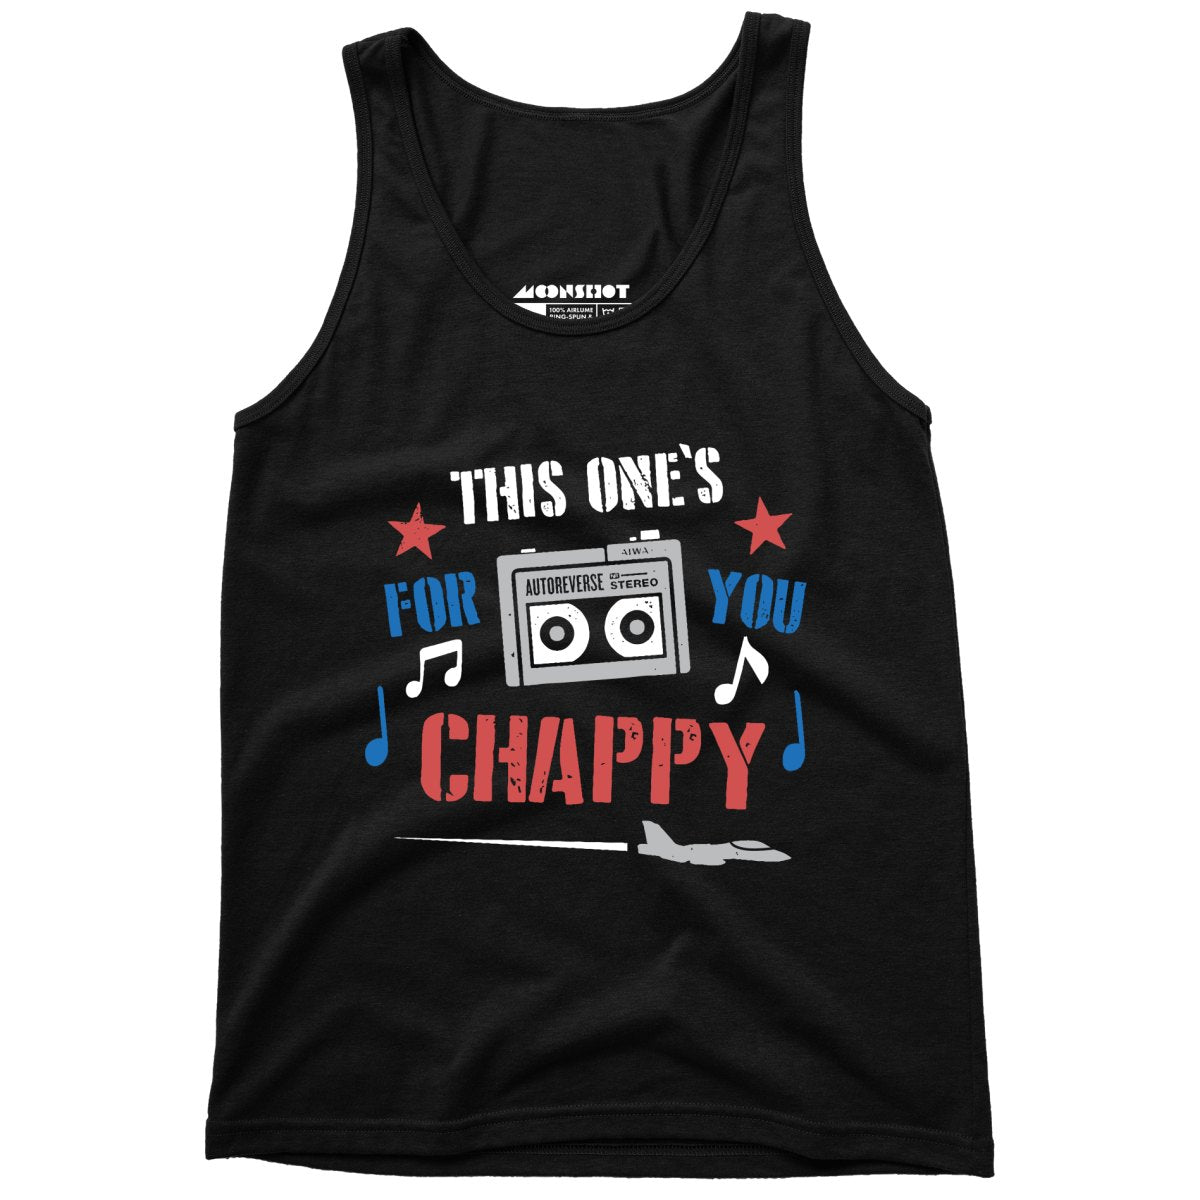 This One's For You Chappy - Iron Eagle - Unisex Tank Top